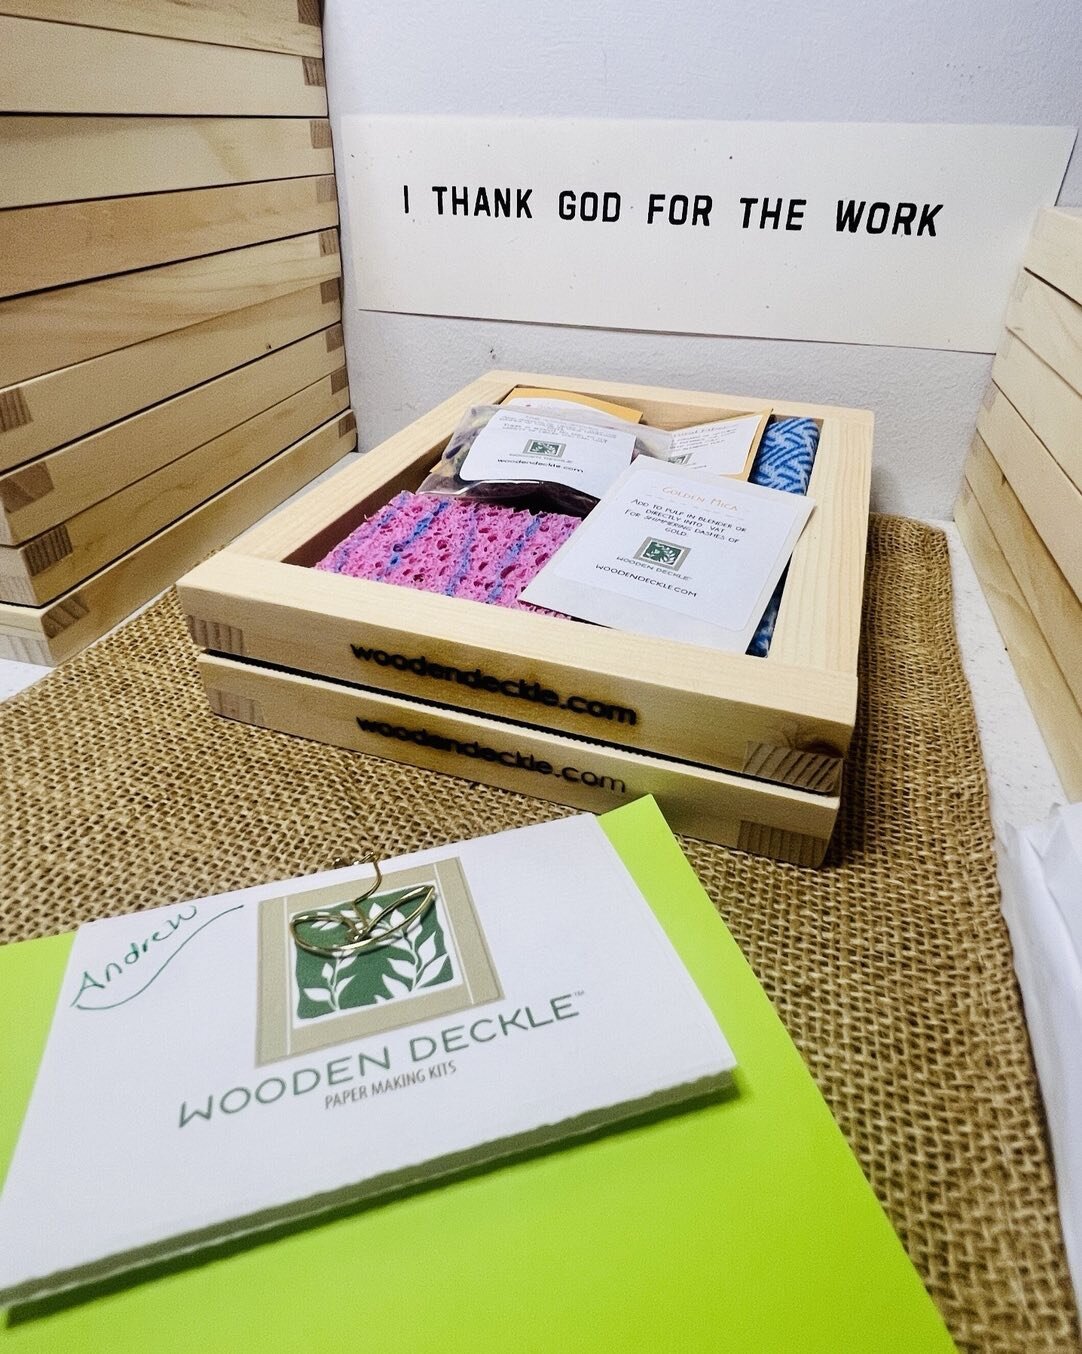 The Square Mold and Deckle — Wooden Deckle Papermaking Kits And Supplie